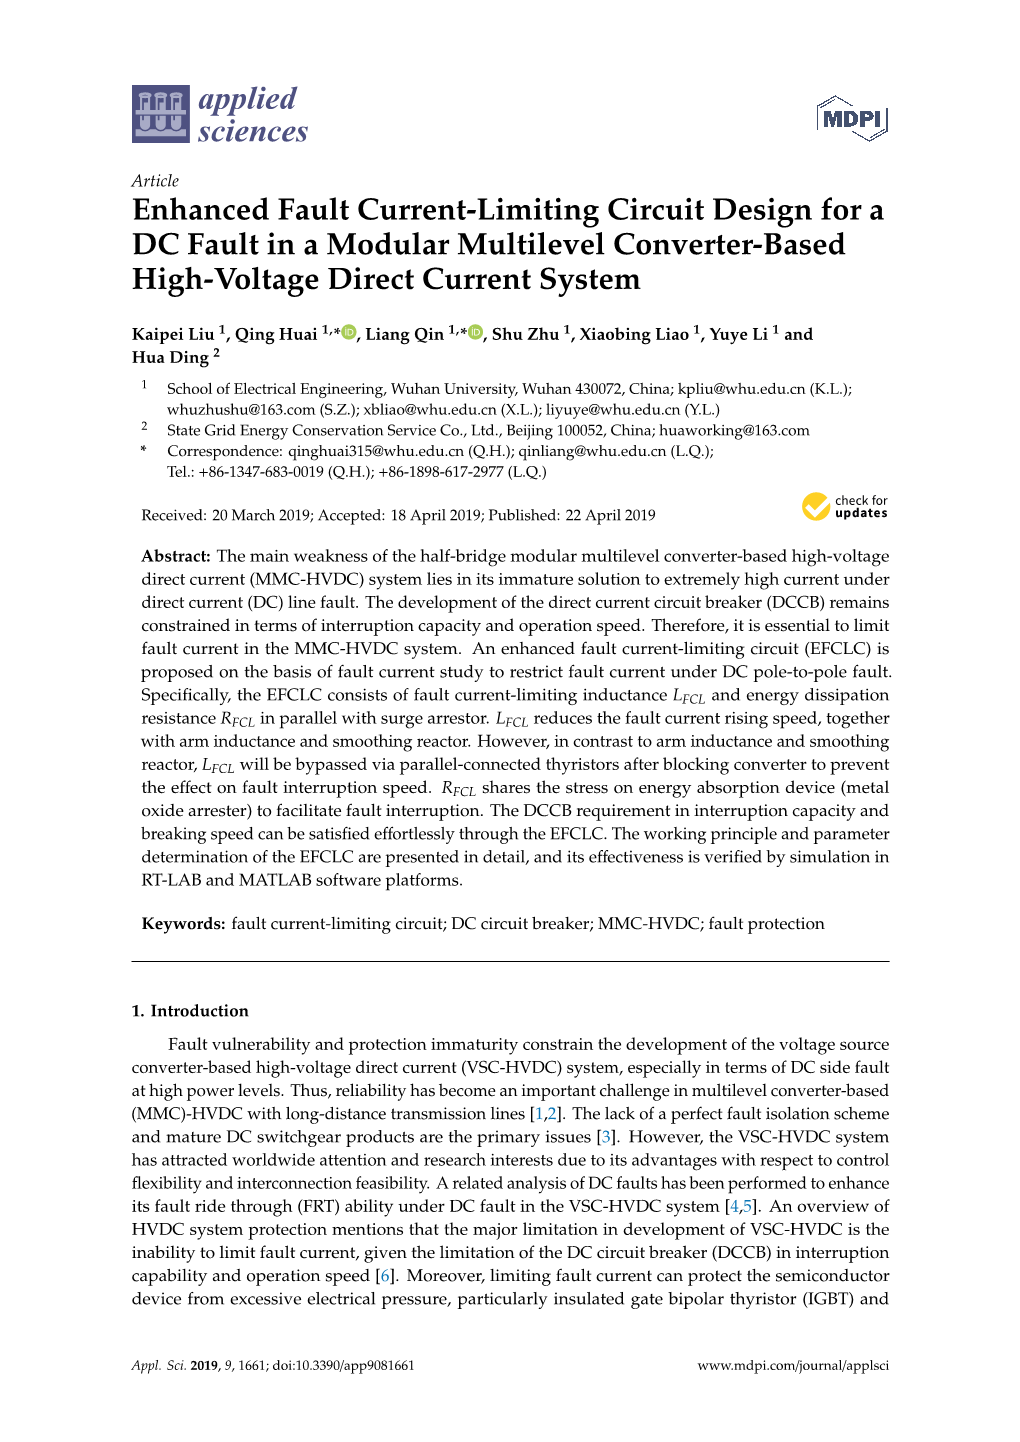 Enhanced Fault Current-Limiting Circuit Design for a DC Fault in a Modular Multilevel Converter-Based High-Voltage Direct Current System